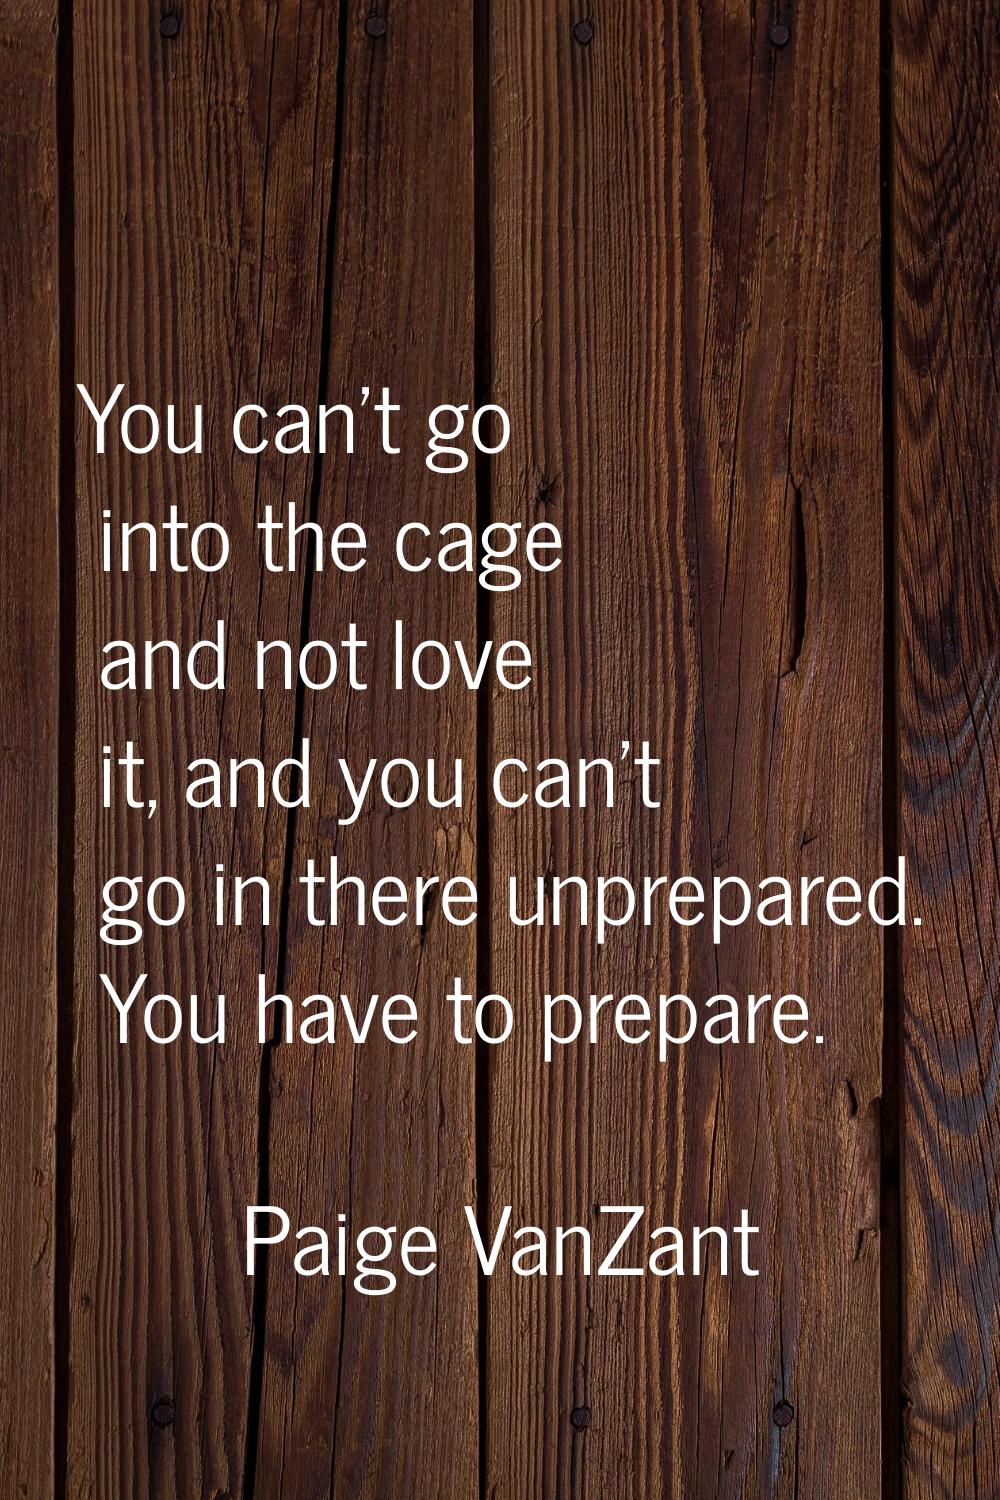 You can't go into the cage and not love it, and you can't go in there unprepared. You have to prepa